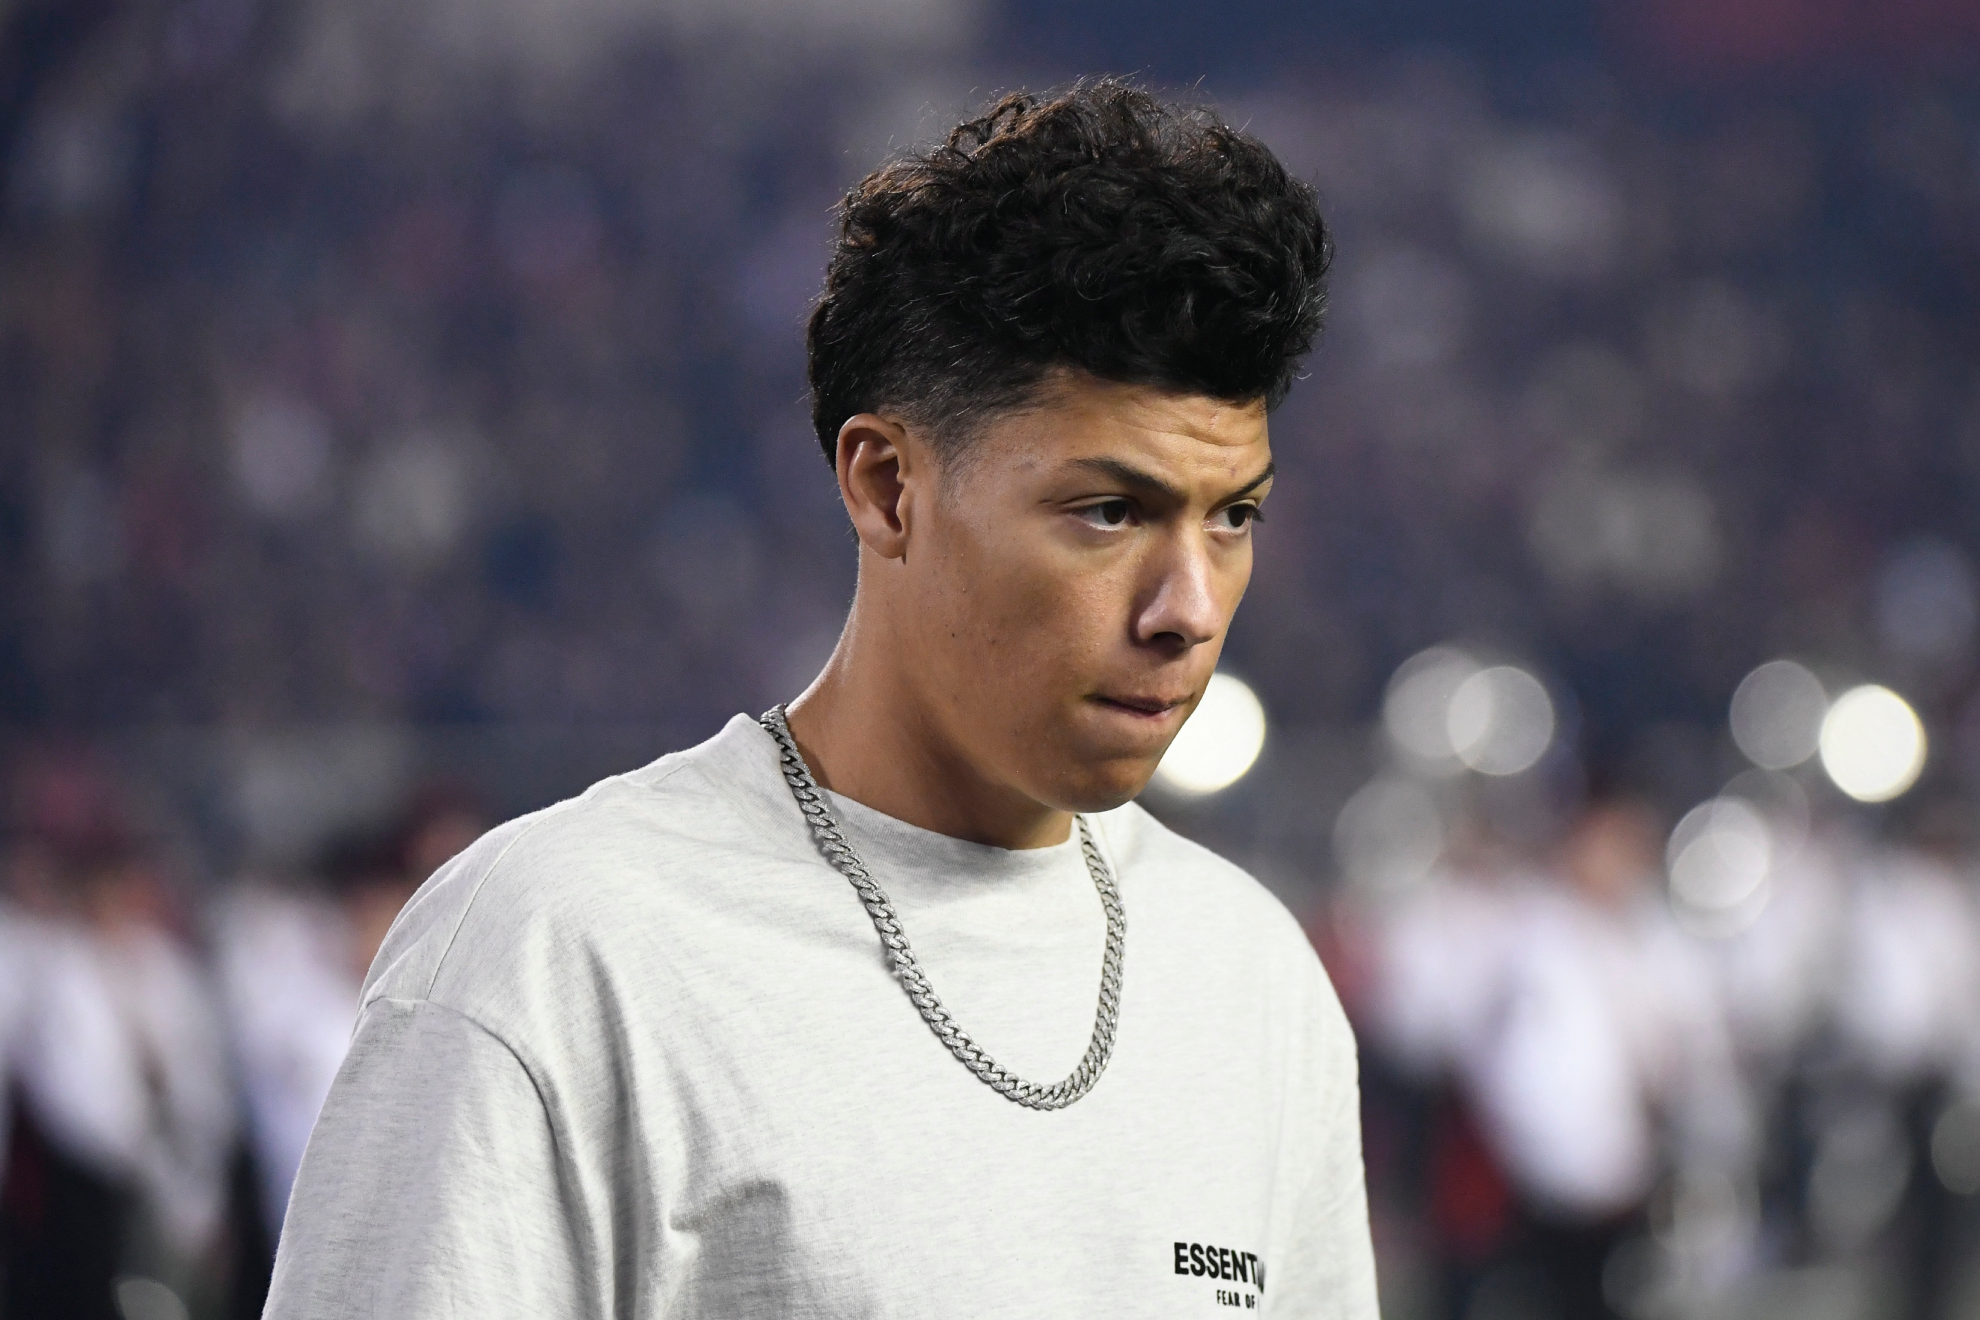 Brittany Mahomes looks totally fed up with Jackson Mahomes after awkward night club incident before Super Bowl